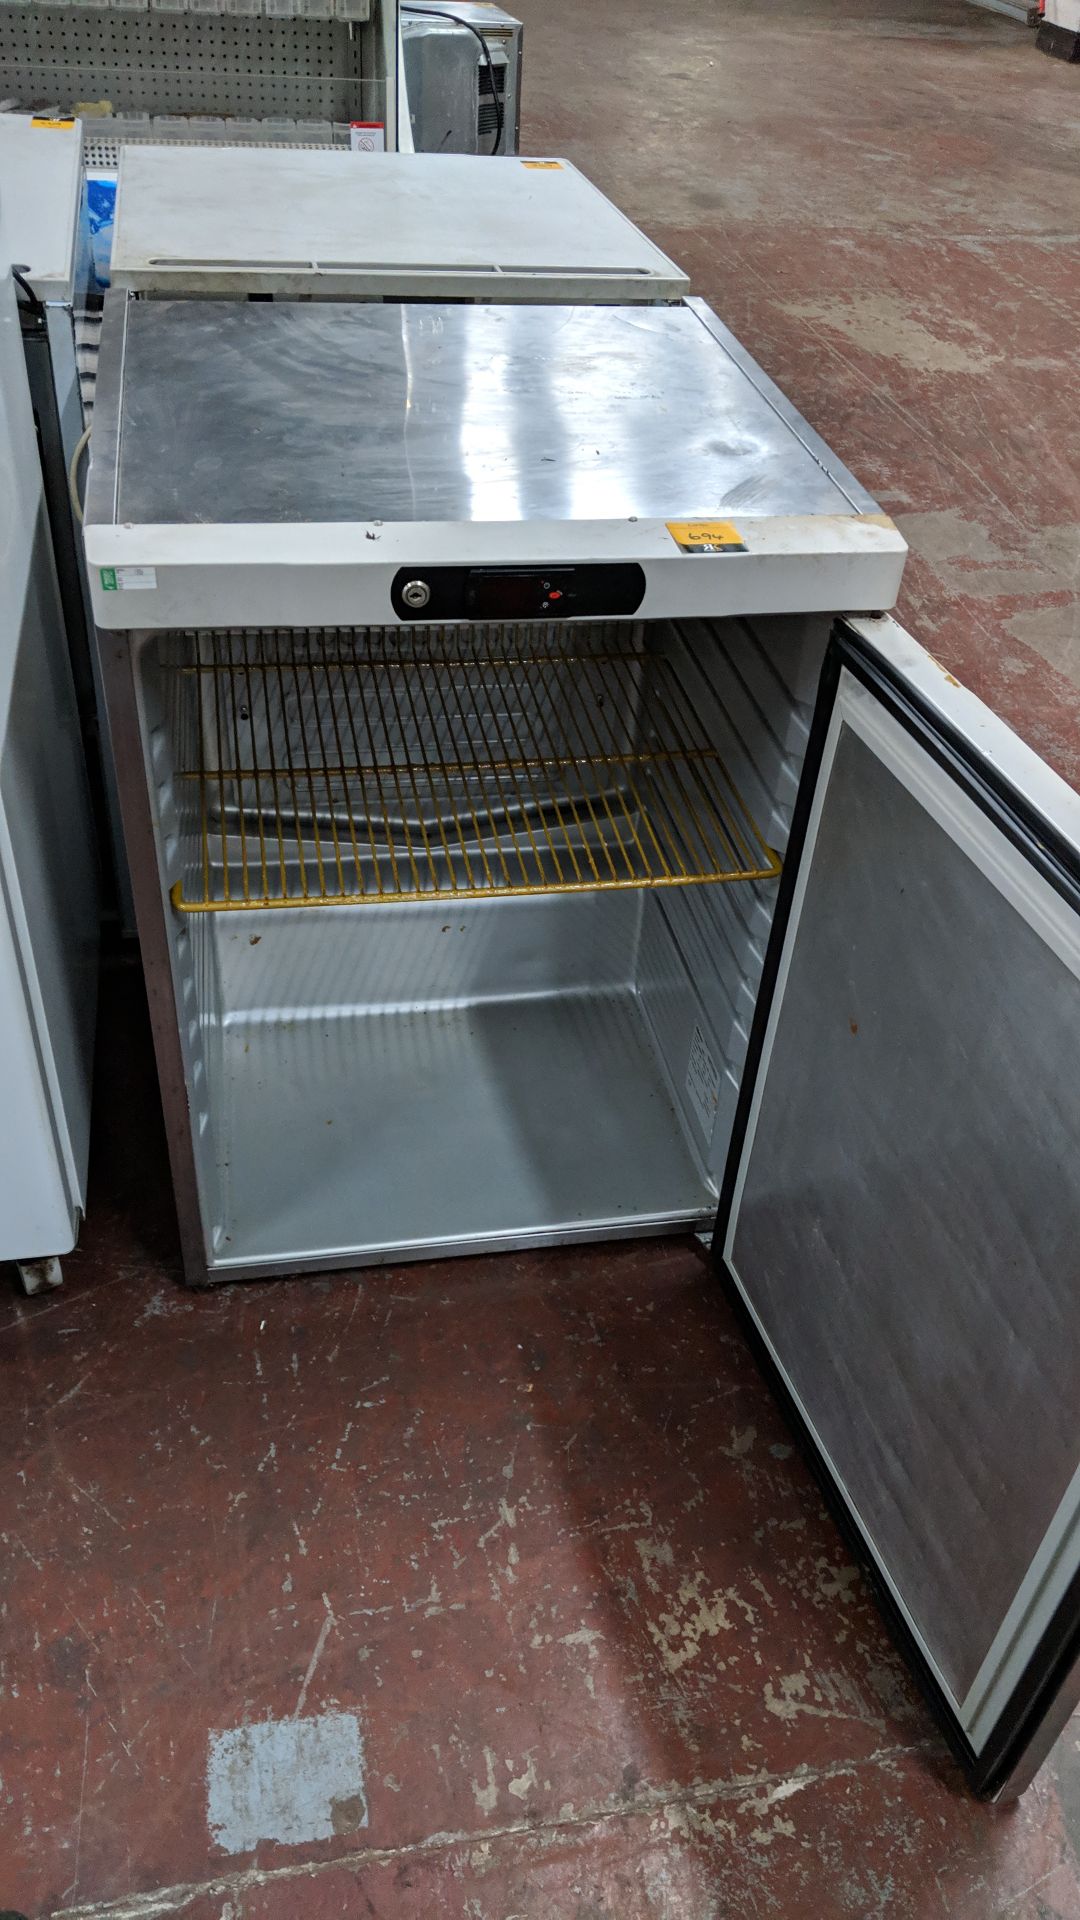 Stainless steel under counter fridge IMPORTANT: Please remember goods successfully bid upon must - Image 4 of 4